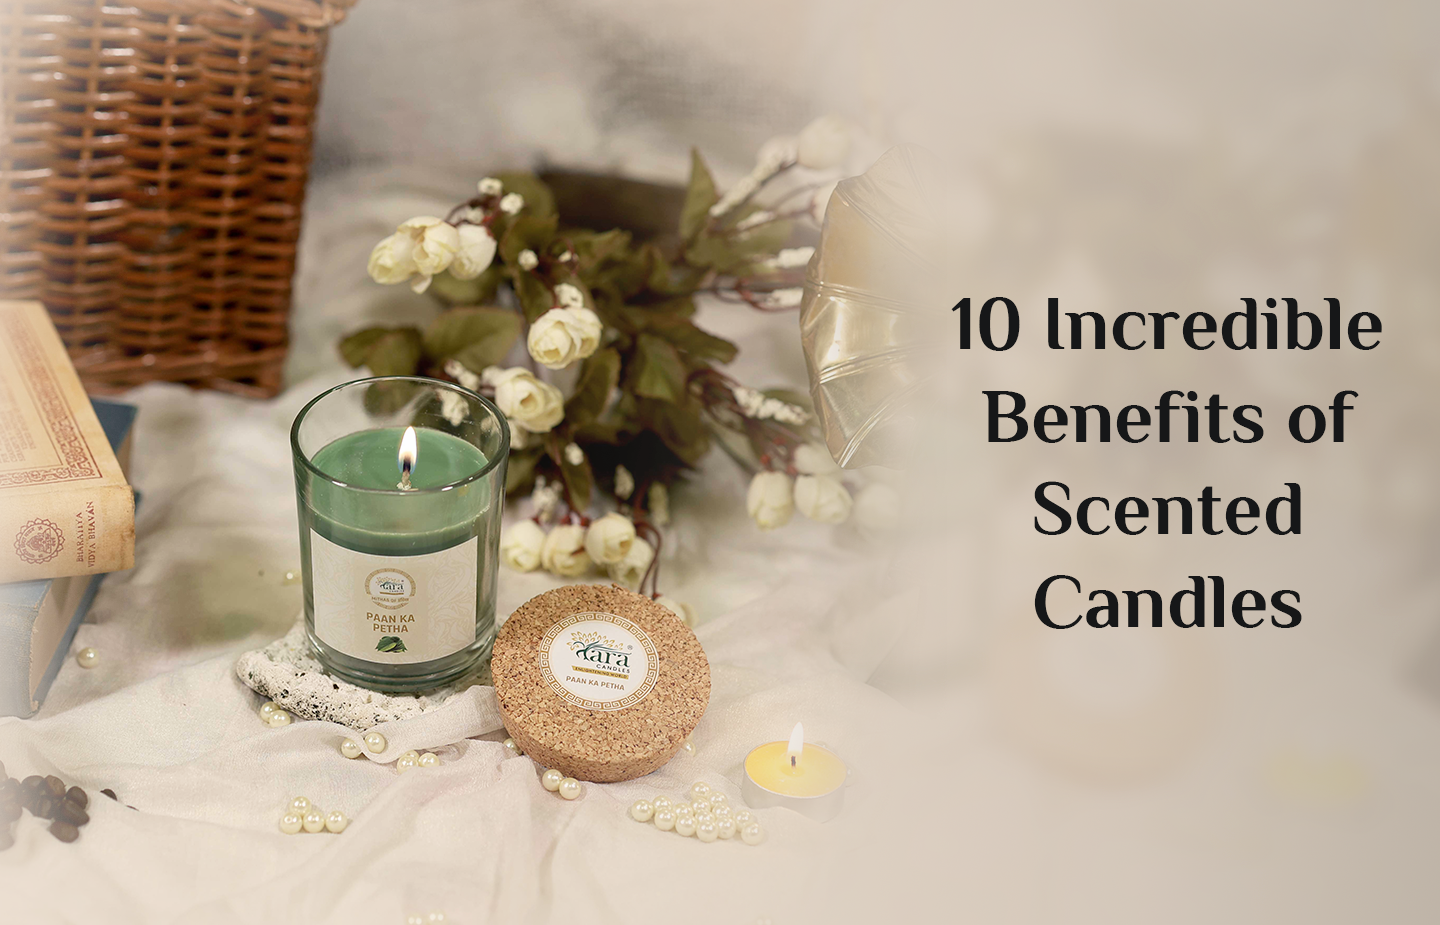 10 Incredible Benefits of Scented Candles